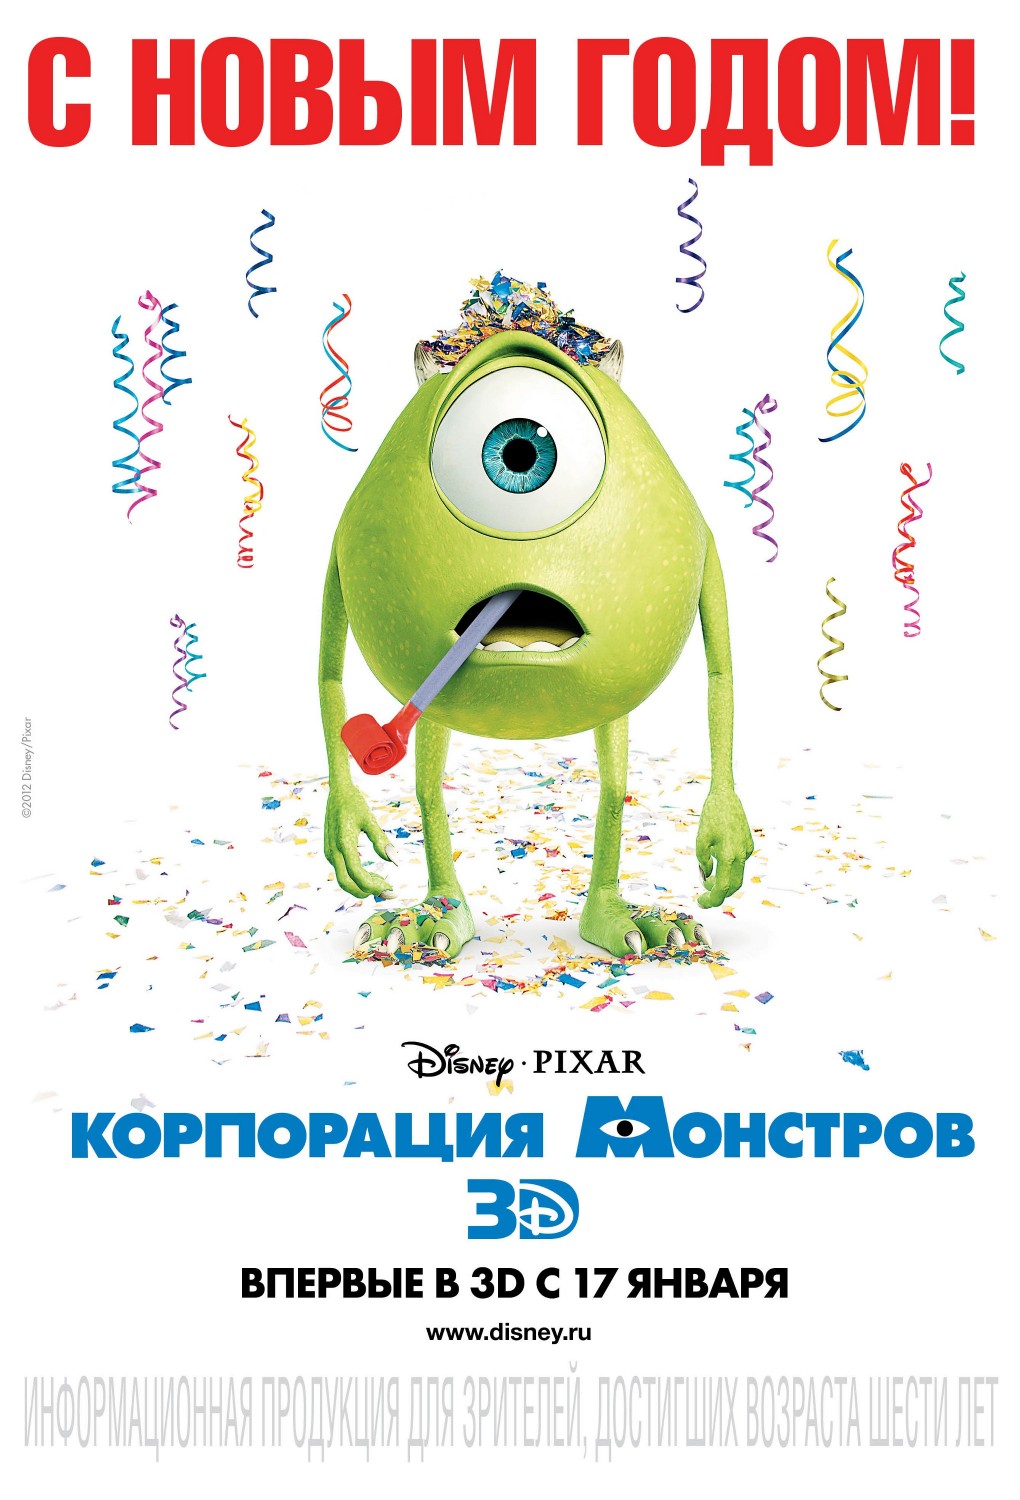 Extra Large Movie Poster Image for Monsters, Inc. (#6 of 10)